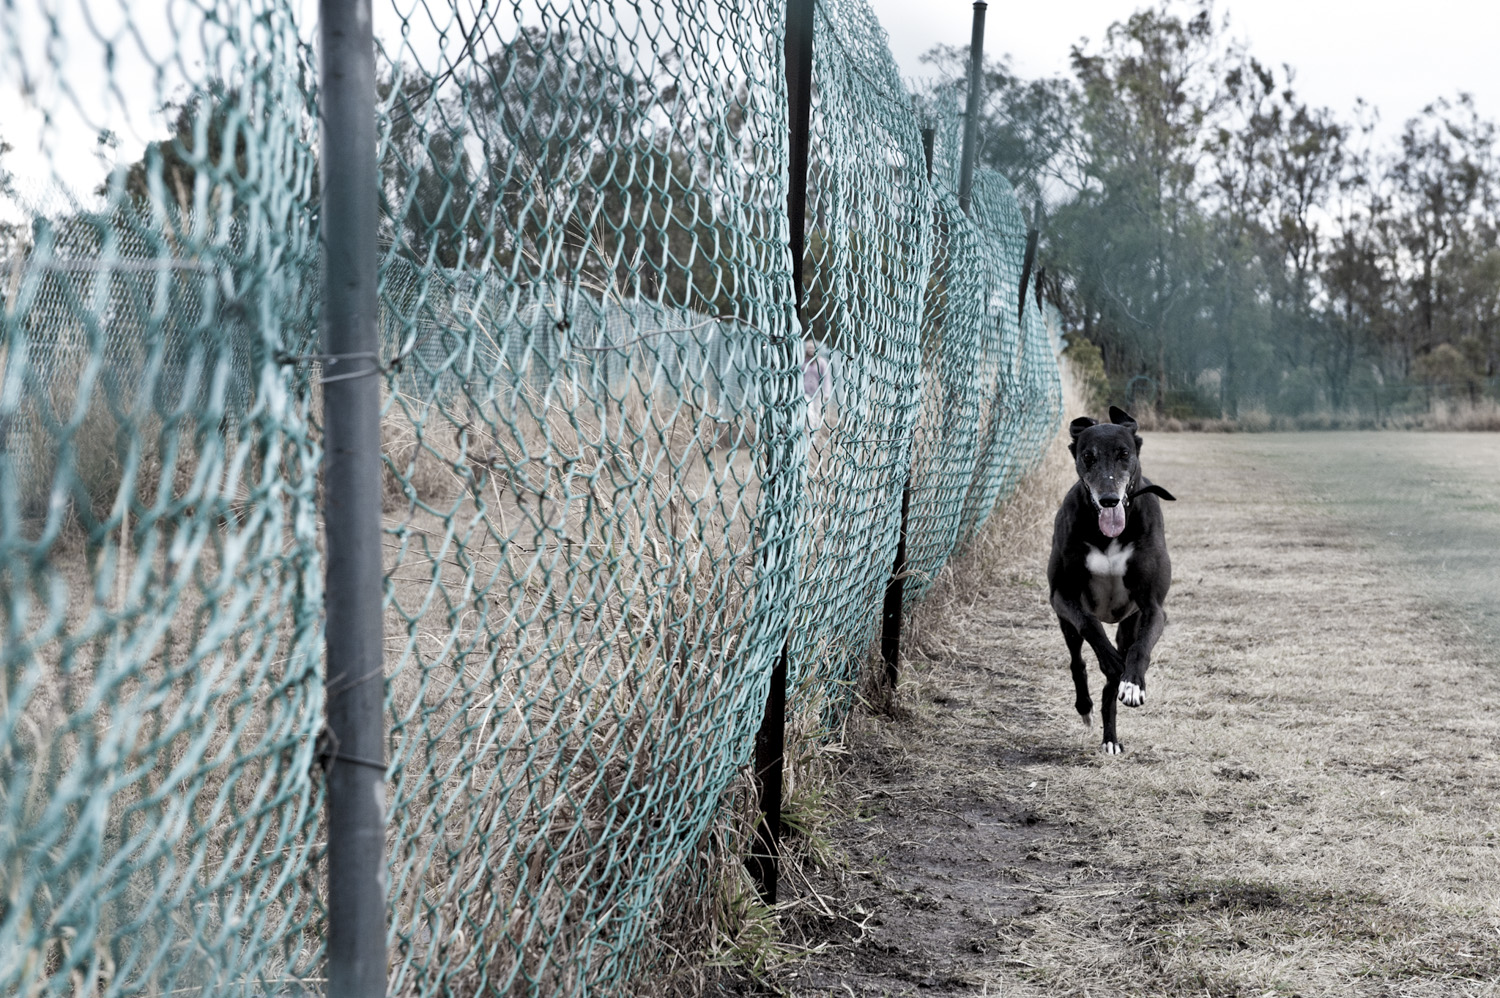 image of AARONTAIT COPYRIGHTED 2014 436 DOCUMENTARY PHOTOGRAPHER REPORTAGE LIFE SPORT DOGS GREYHOUND RACING STORY HUMAN DISHLICKER DISH LICKER RUNNING ENERGY